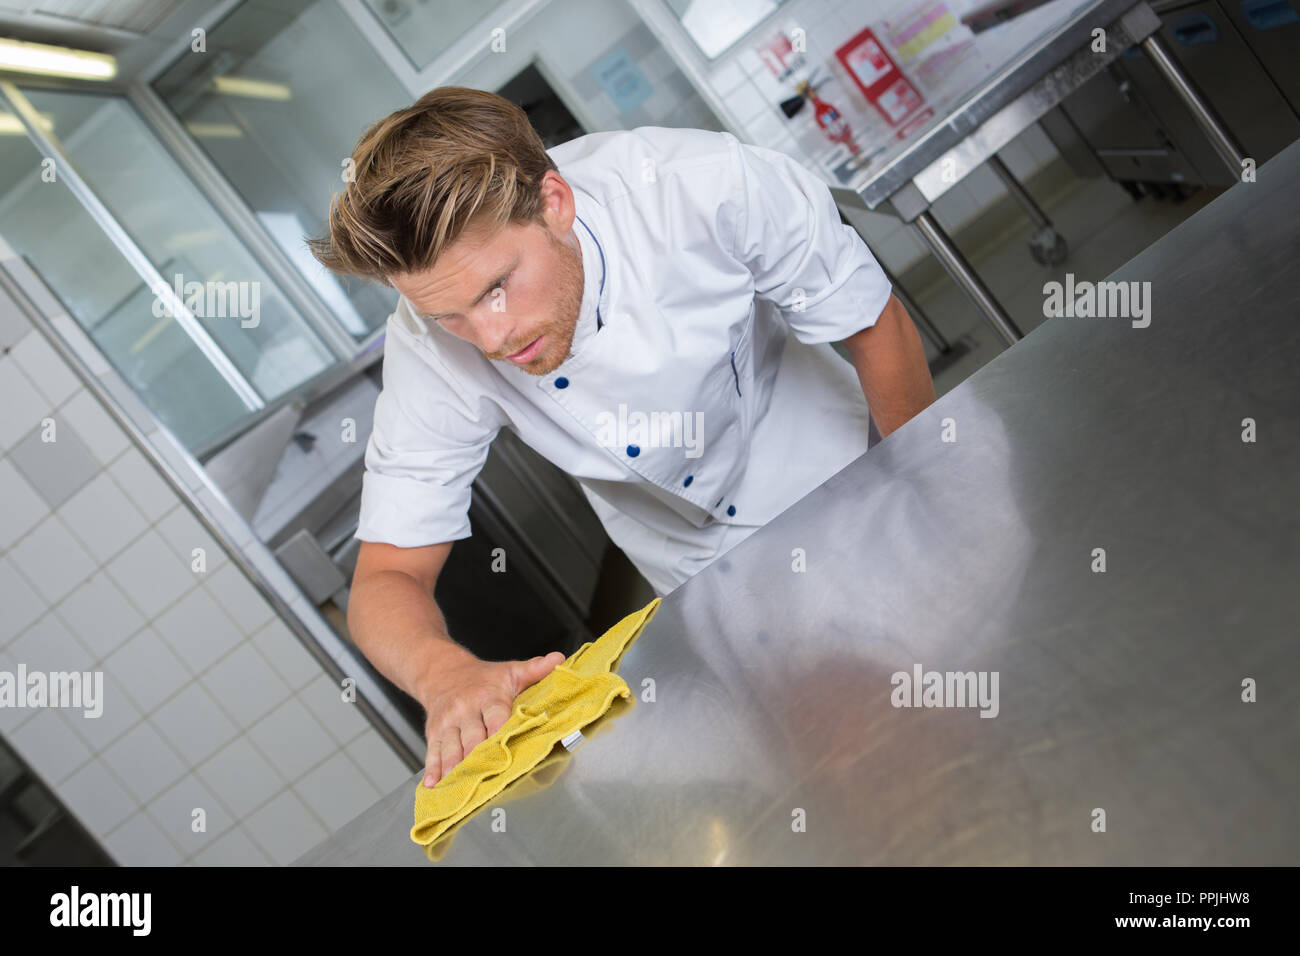 Male Chef Cleaning Stainless Steel Kitchen Work Surface Stock